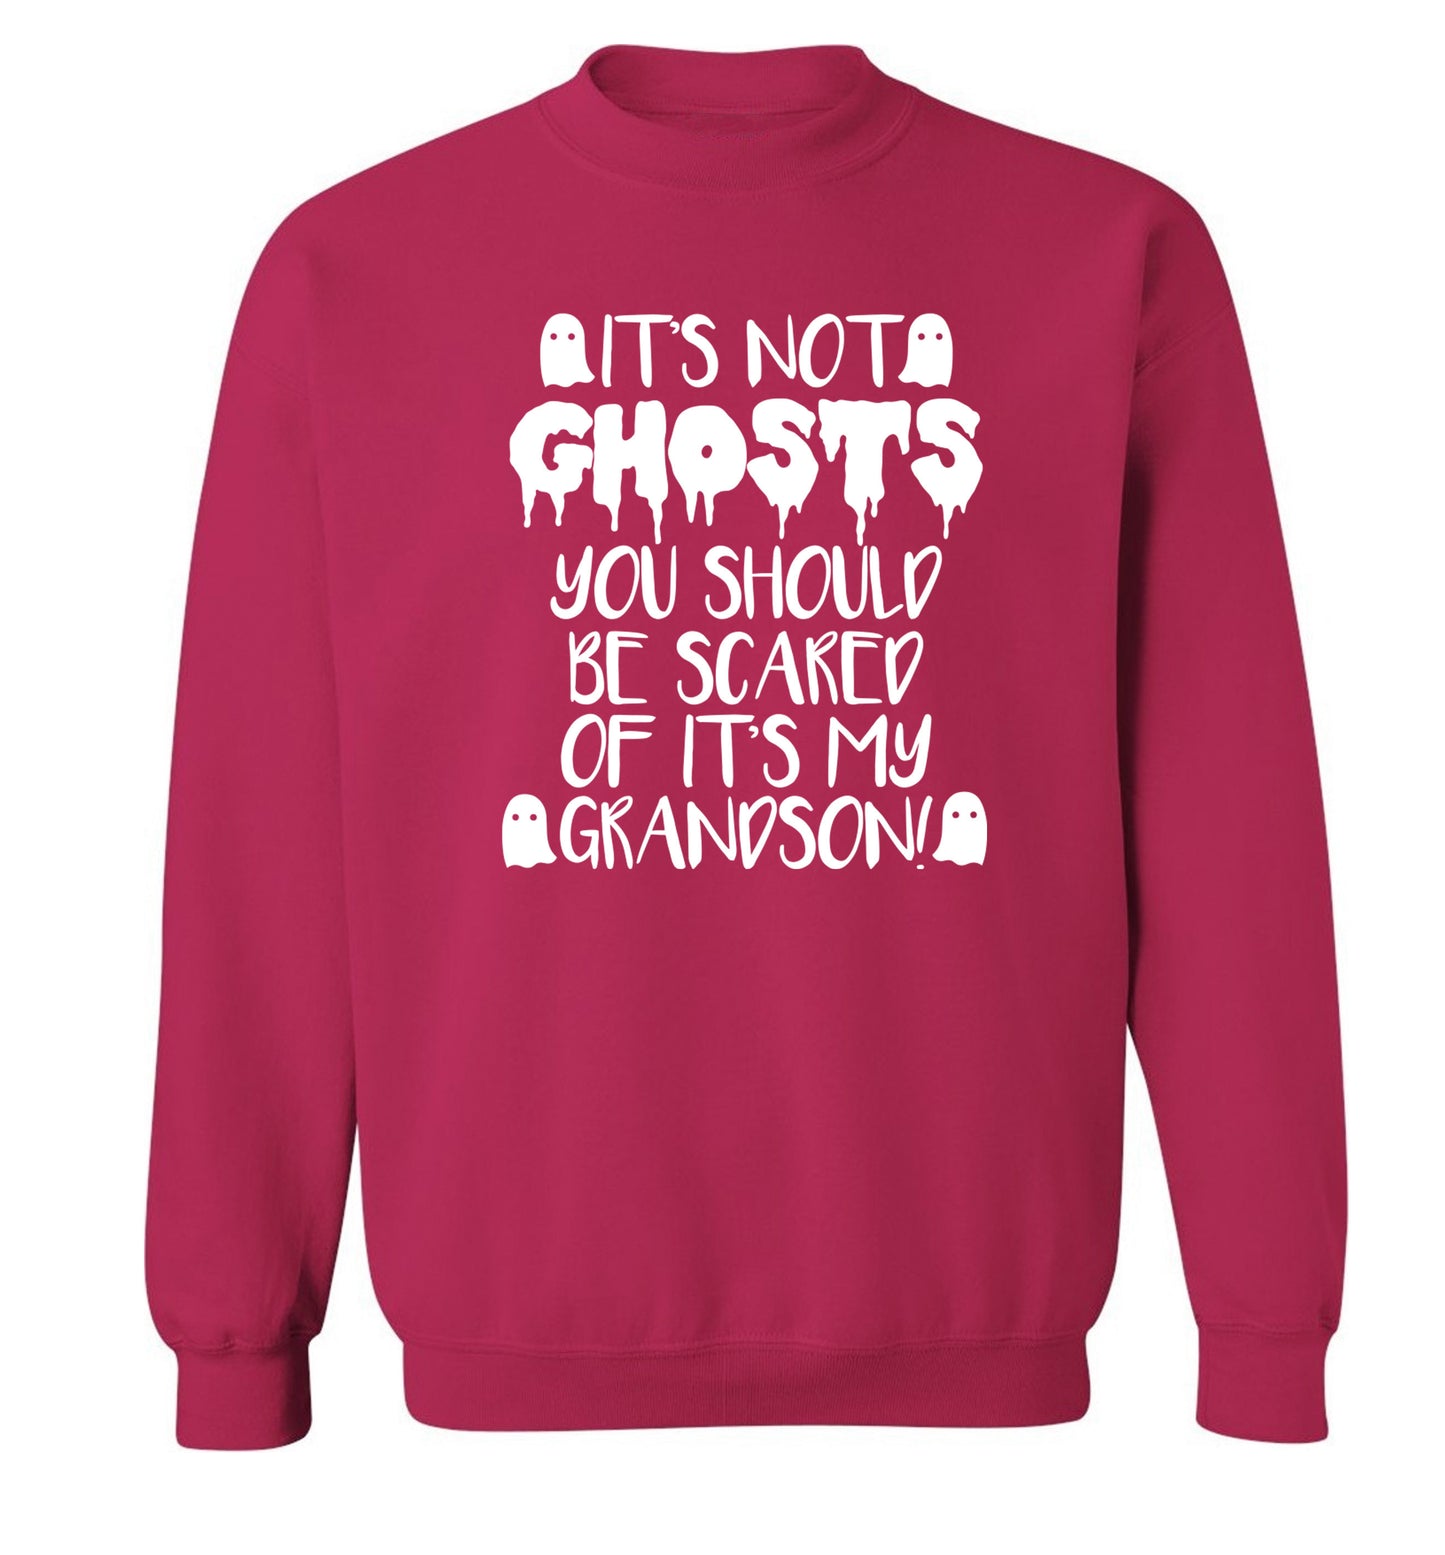 It's not ghosts you should be scared of it's my grandson! Adult's unisex pink Sweater 2XL